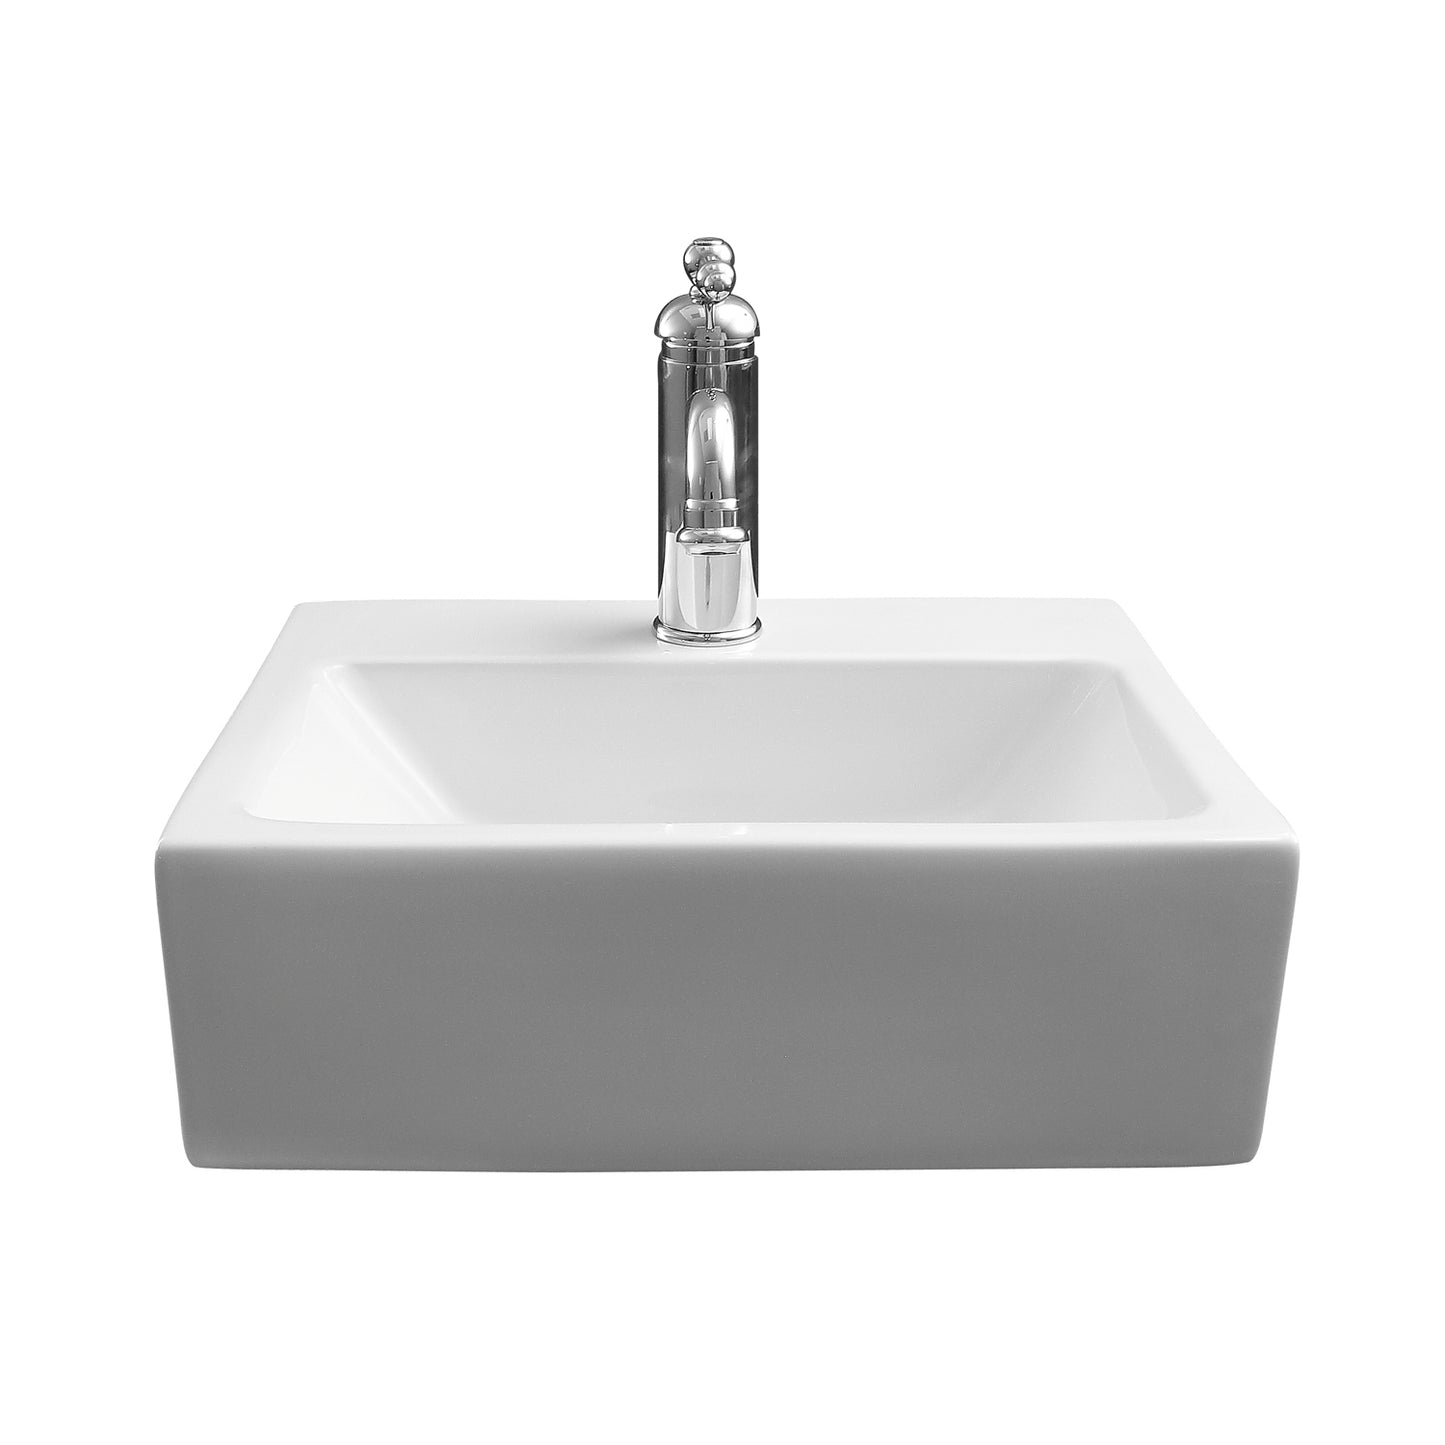 Linden Rectangular 16 3/4" Wall Hung Sink White with 1 Faucet Hole